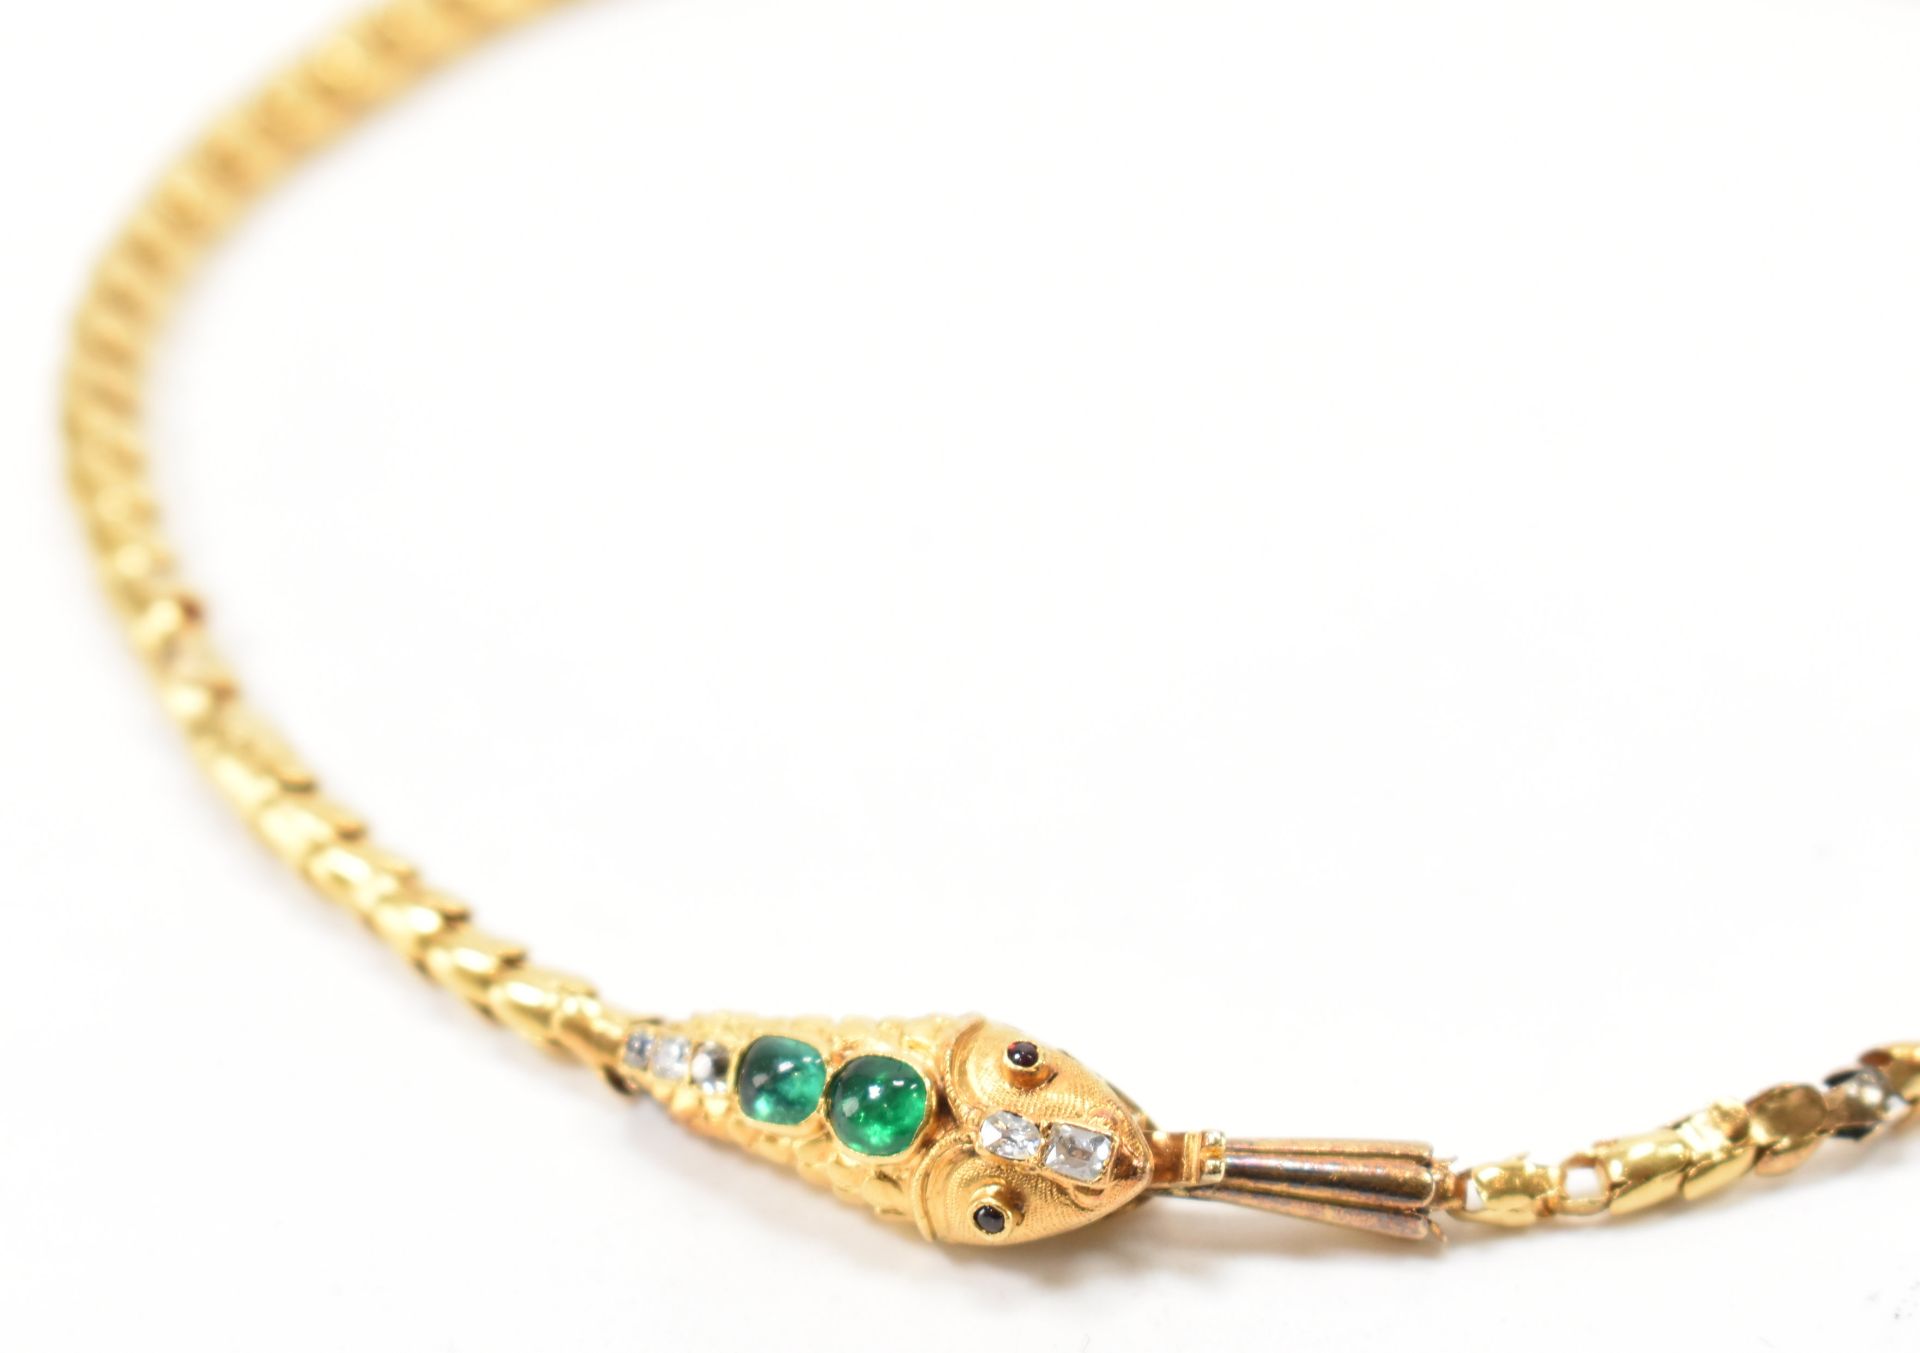 VICTORIAN EMERALD DIAMOND SPINEL & GOLD SERPENT NECKLACE - Image 3 of 11